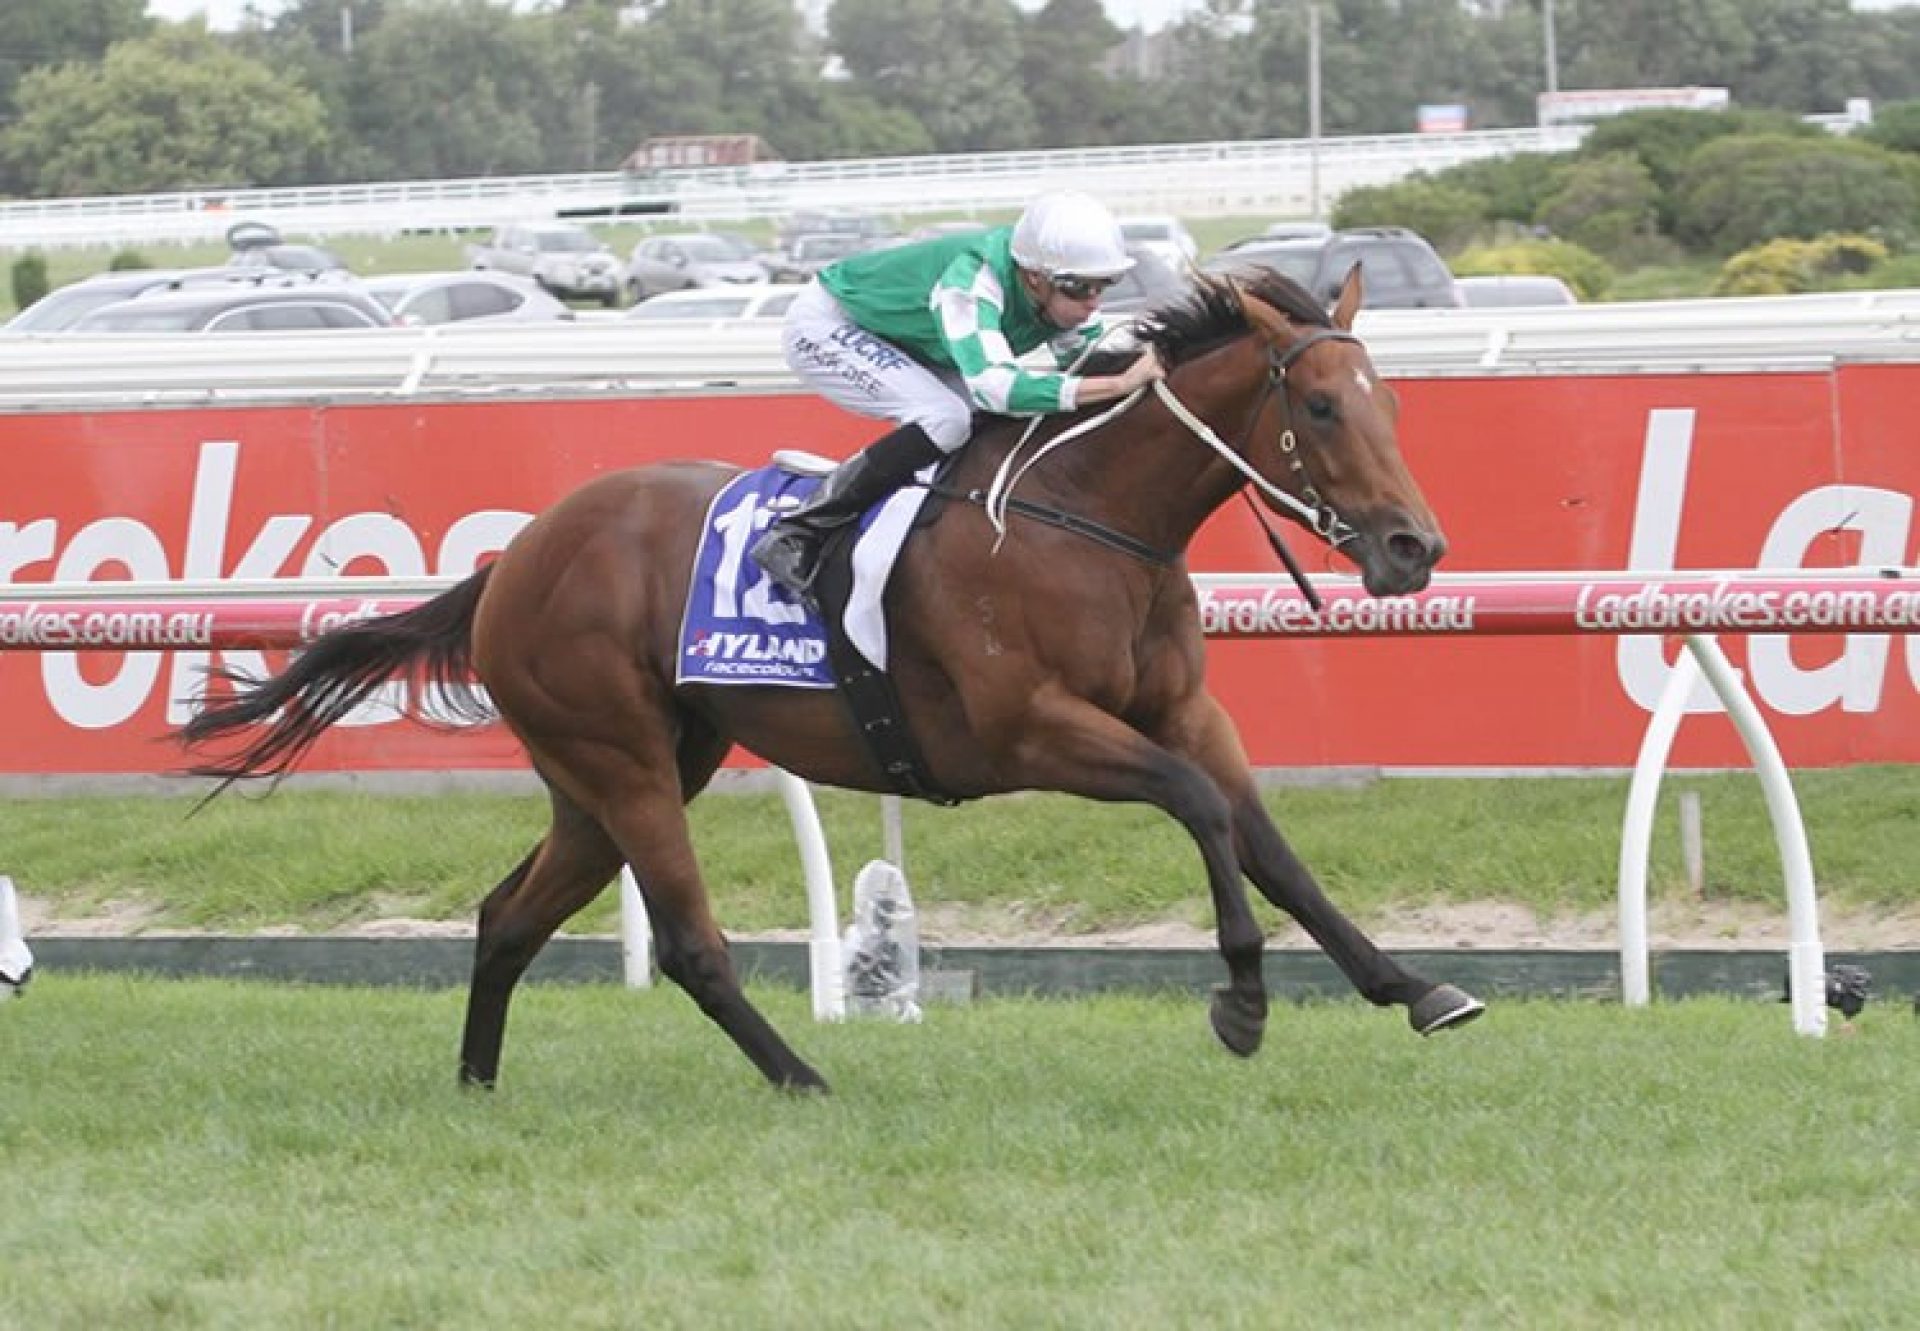 Holy Snow (Fastnet Rock) winning the G3 Autumn Stakes at Caulfield